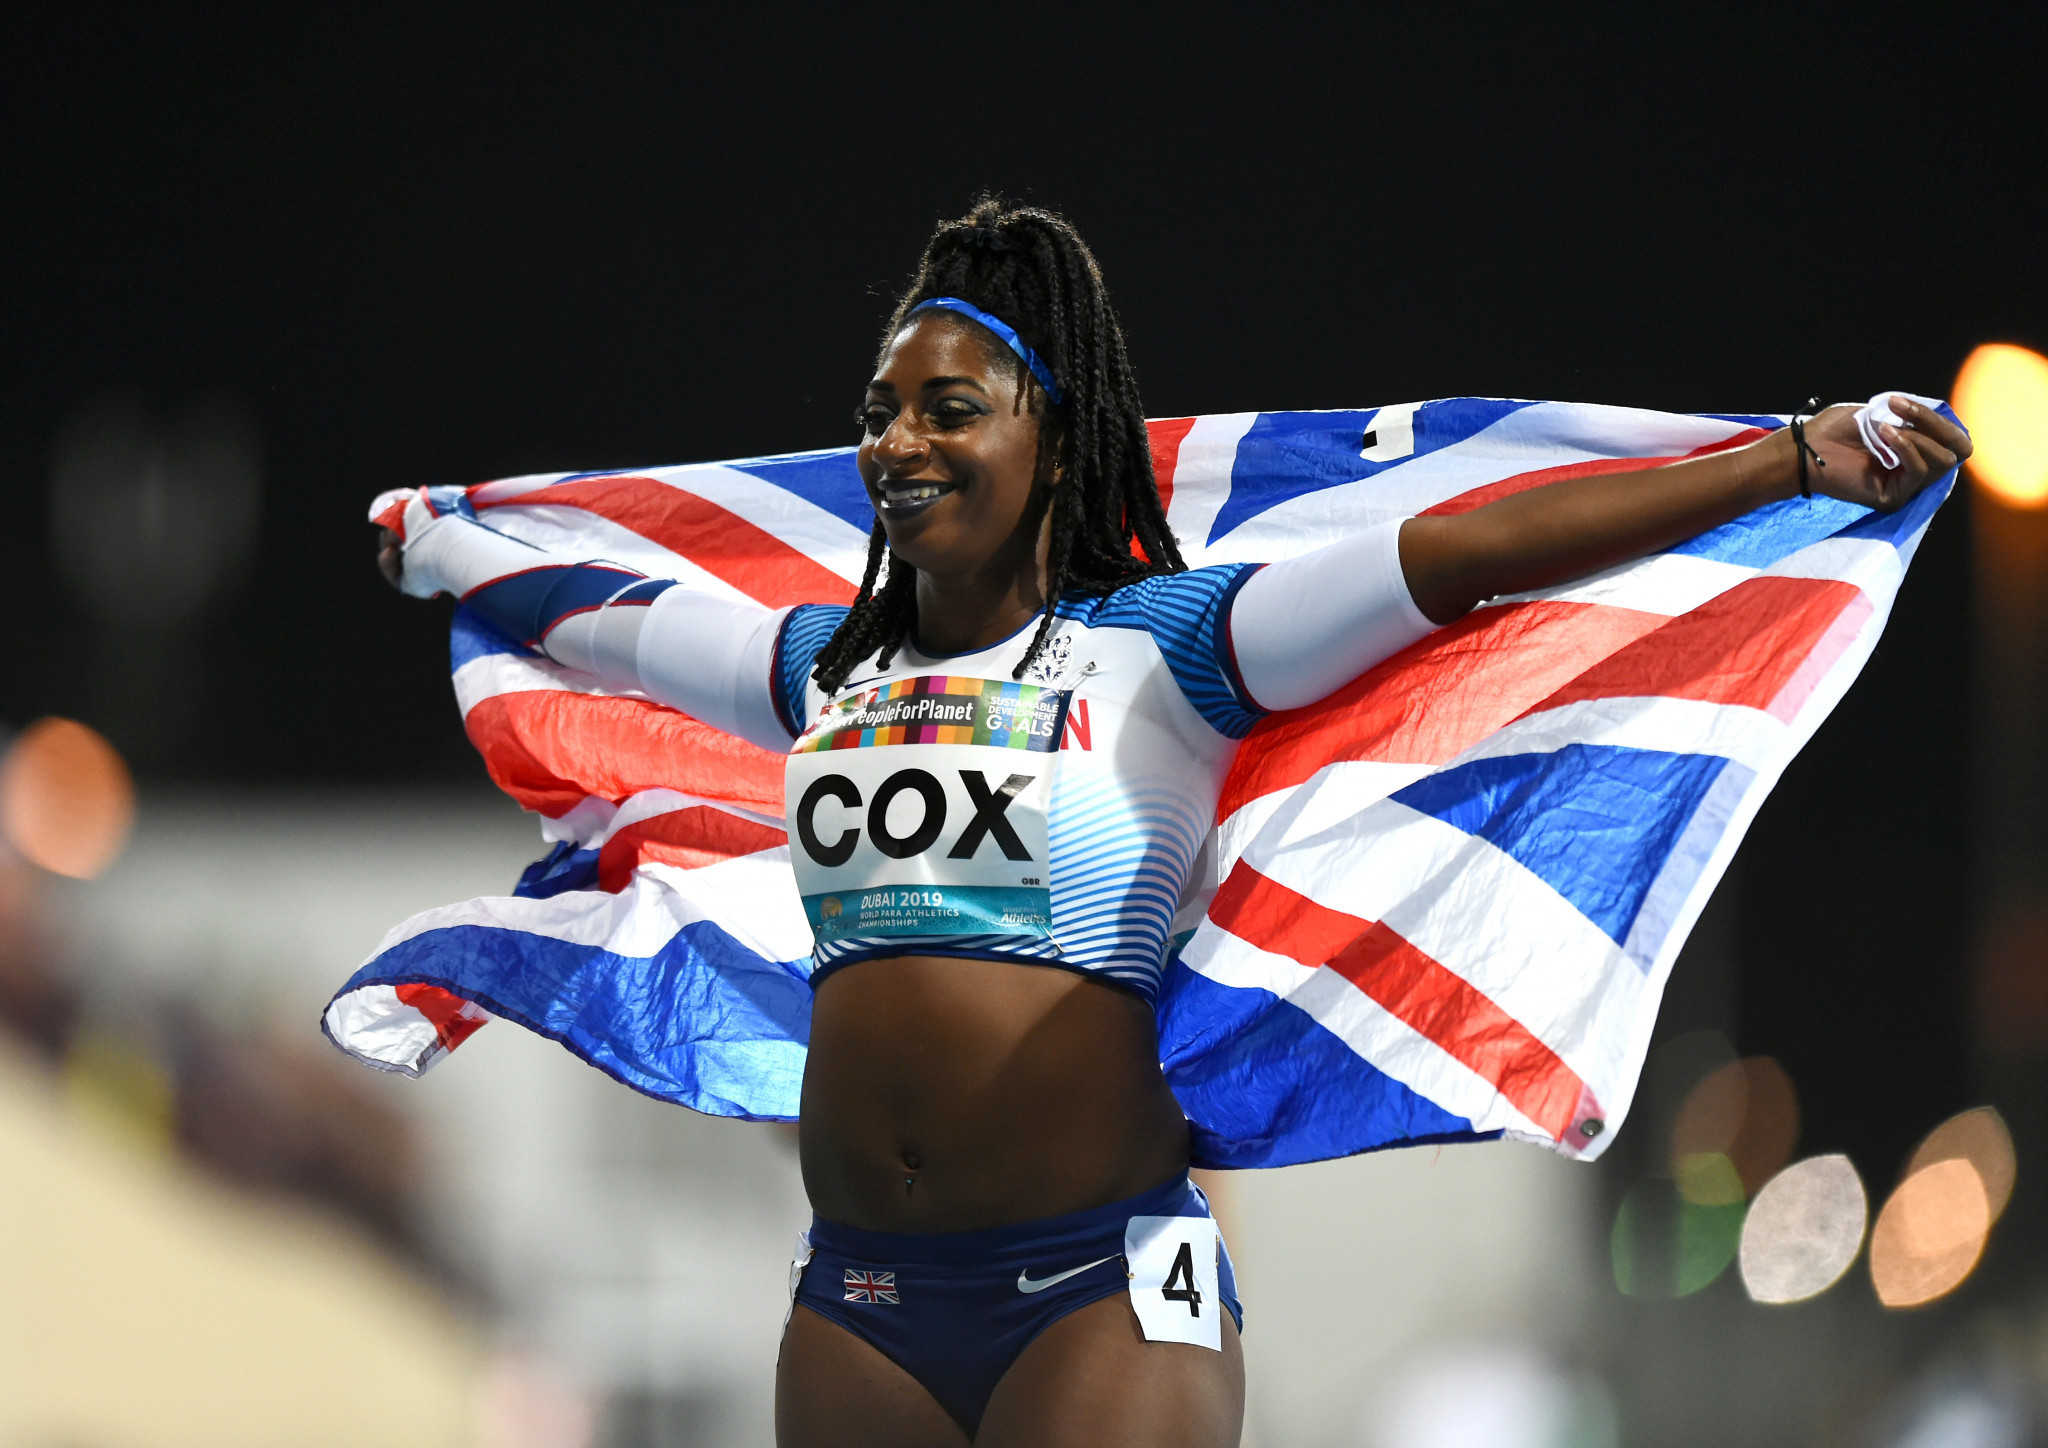 Paralympic champion Cox added to British Athletics Equality, Diversity and Inclusion Advocates Group